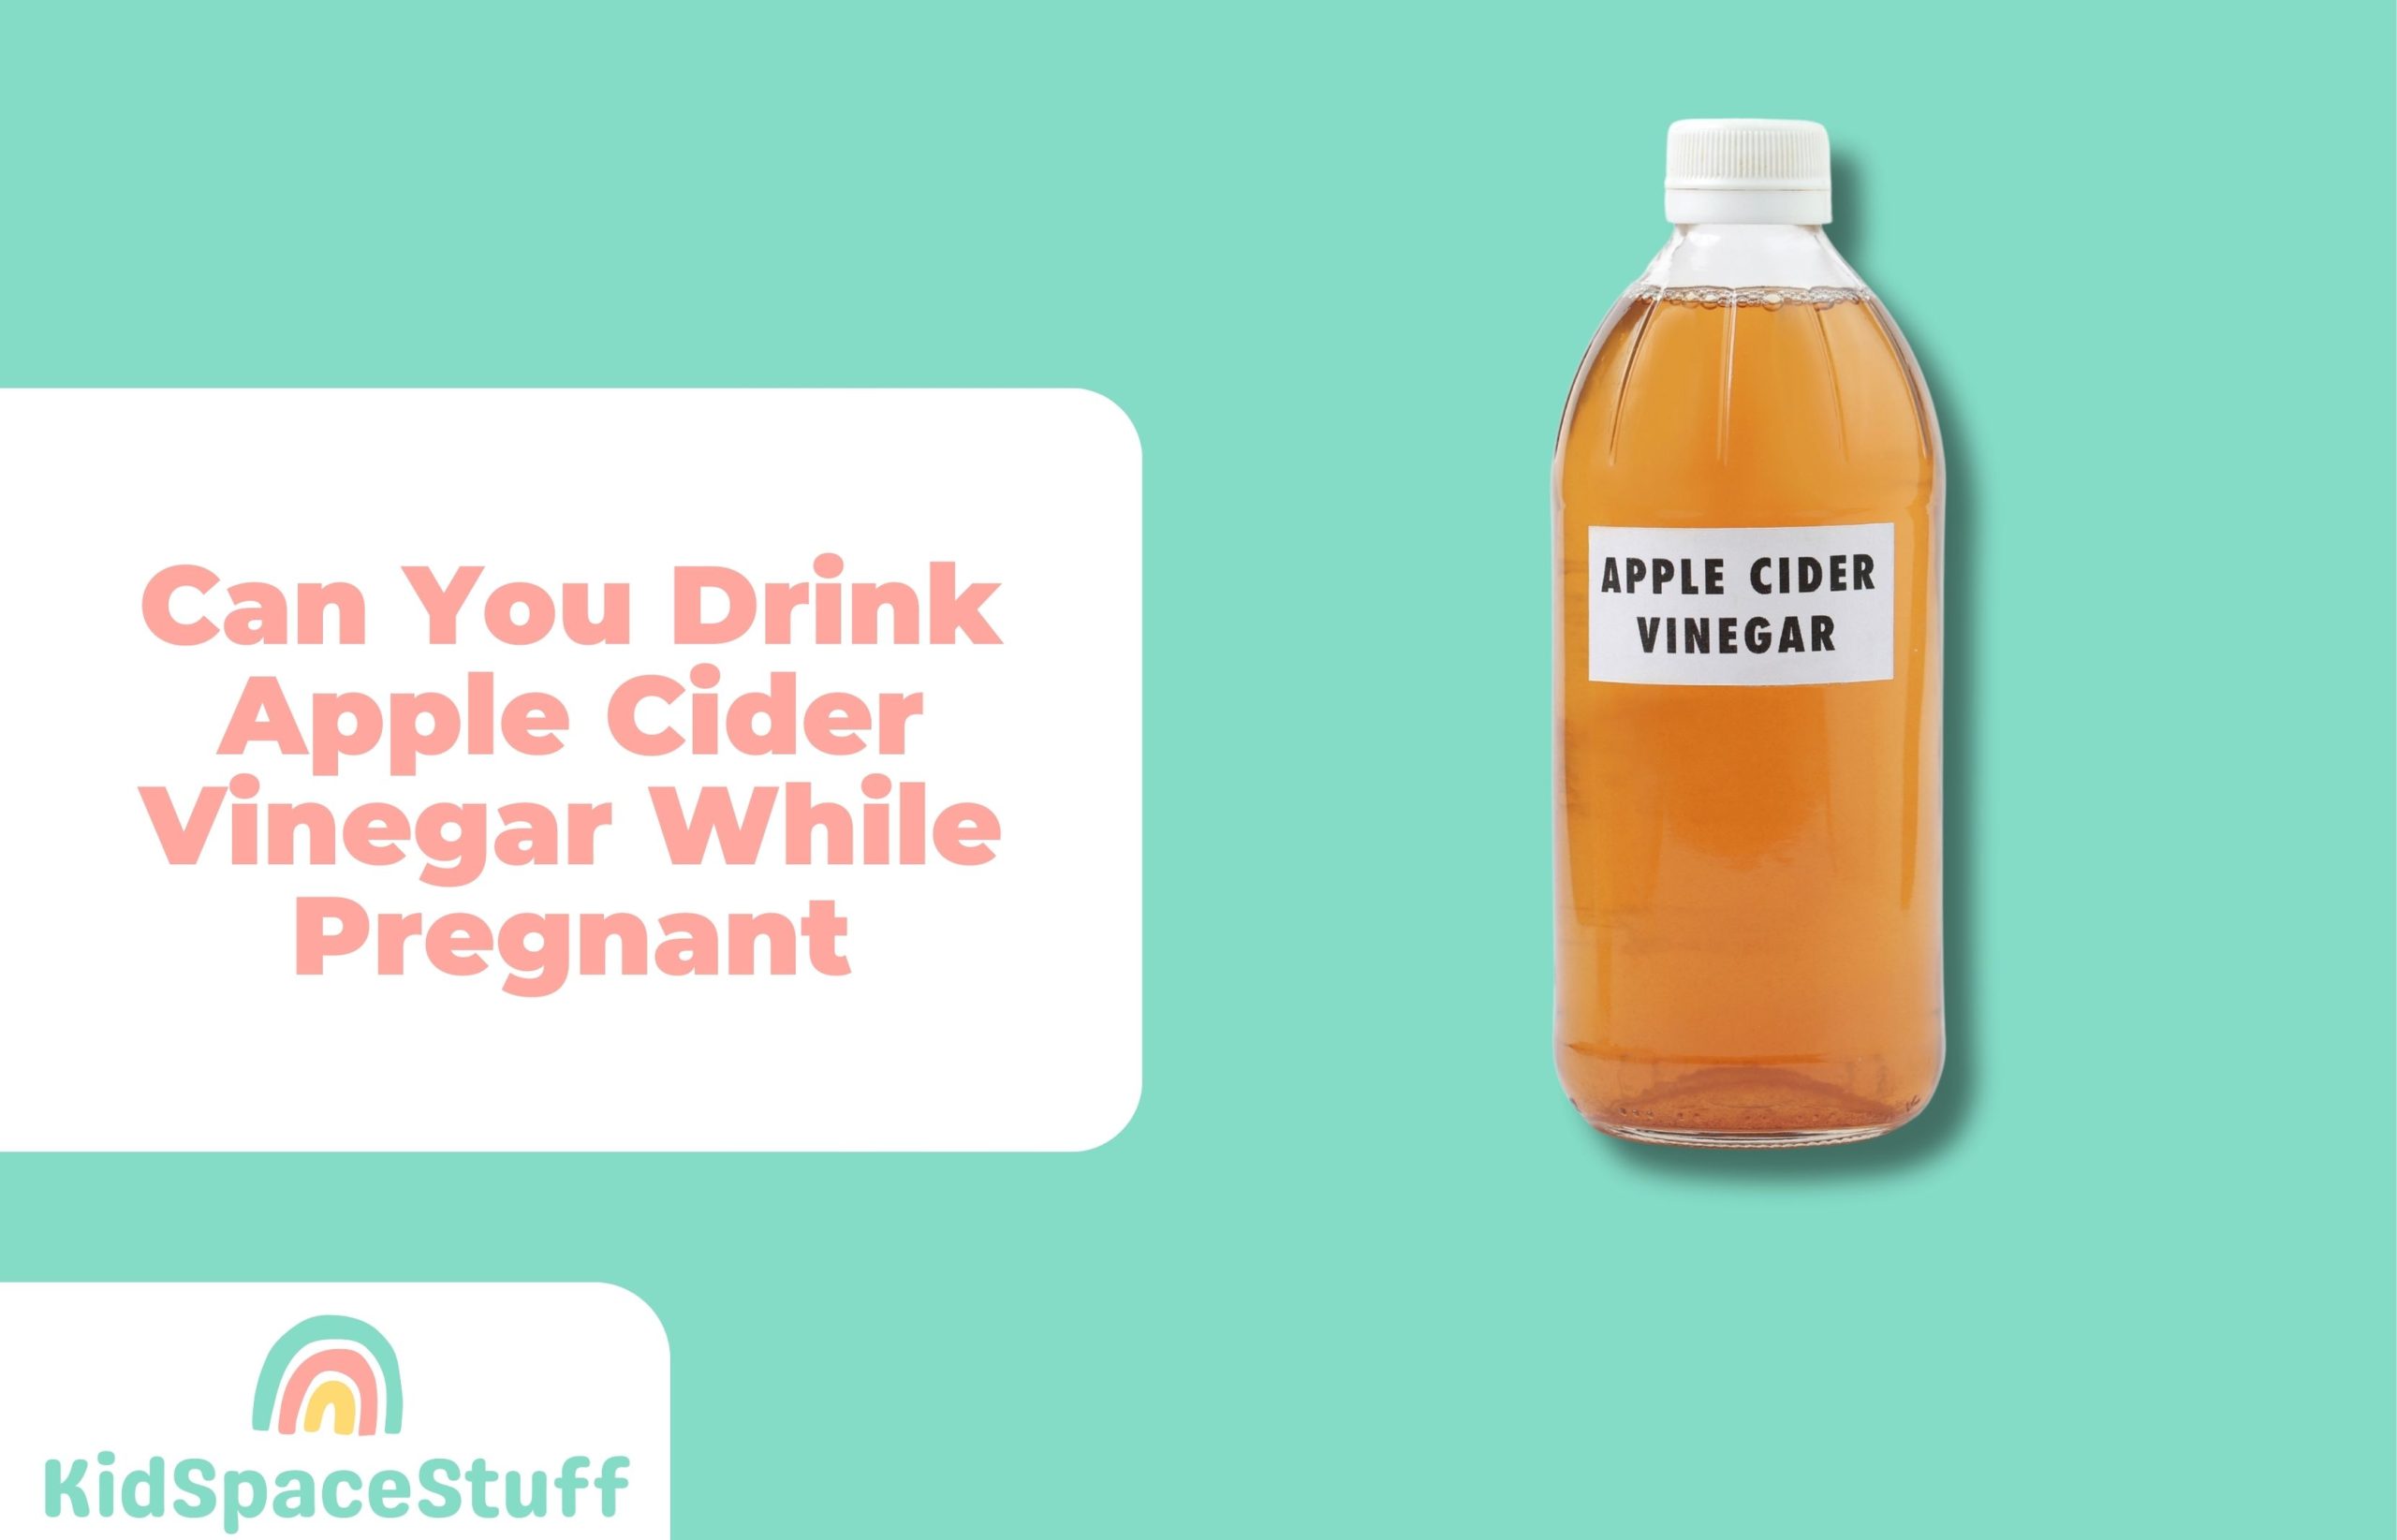 Can You Drink Apple Cider Vinegar While Pregnant? (Quick Answer!)